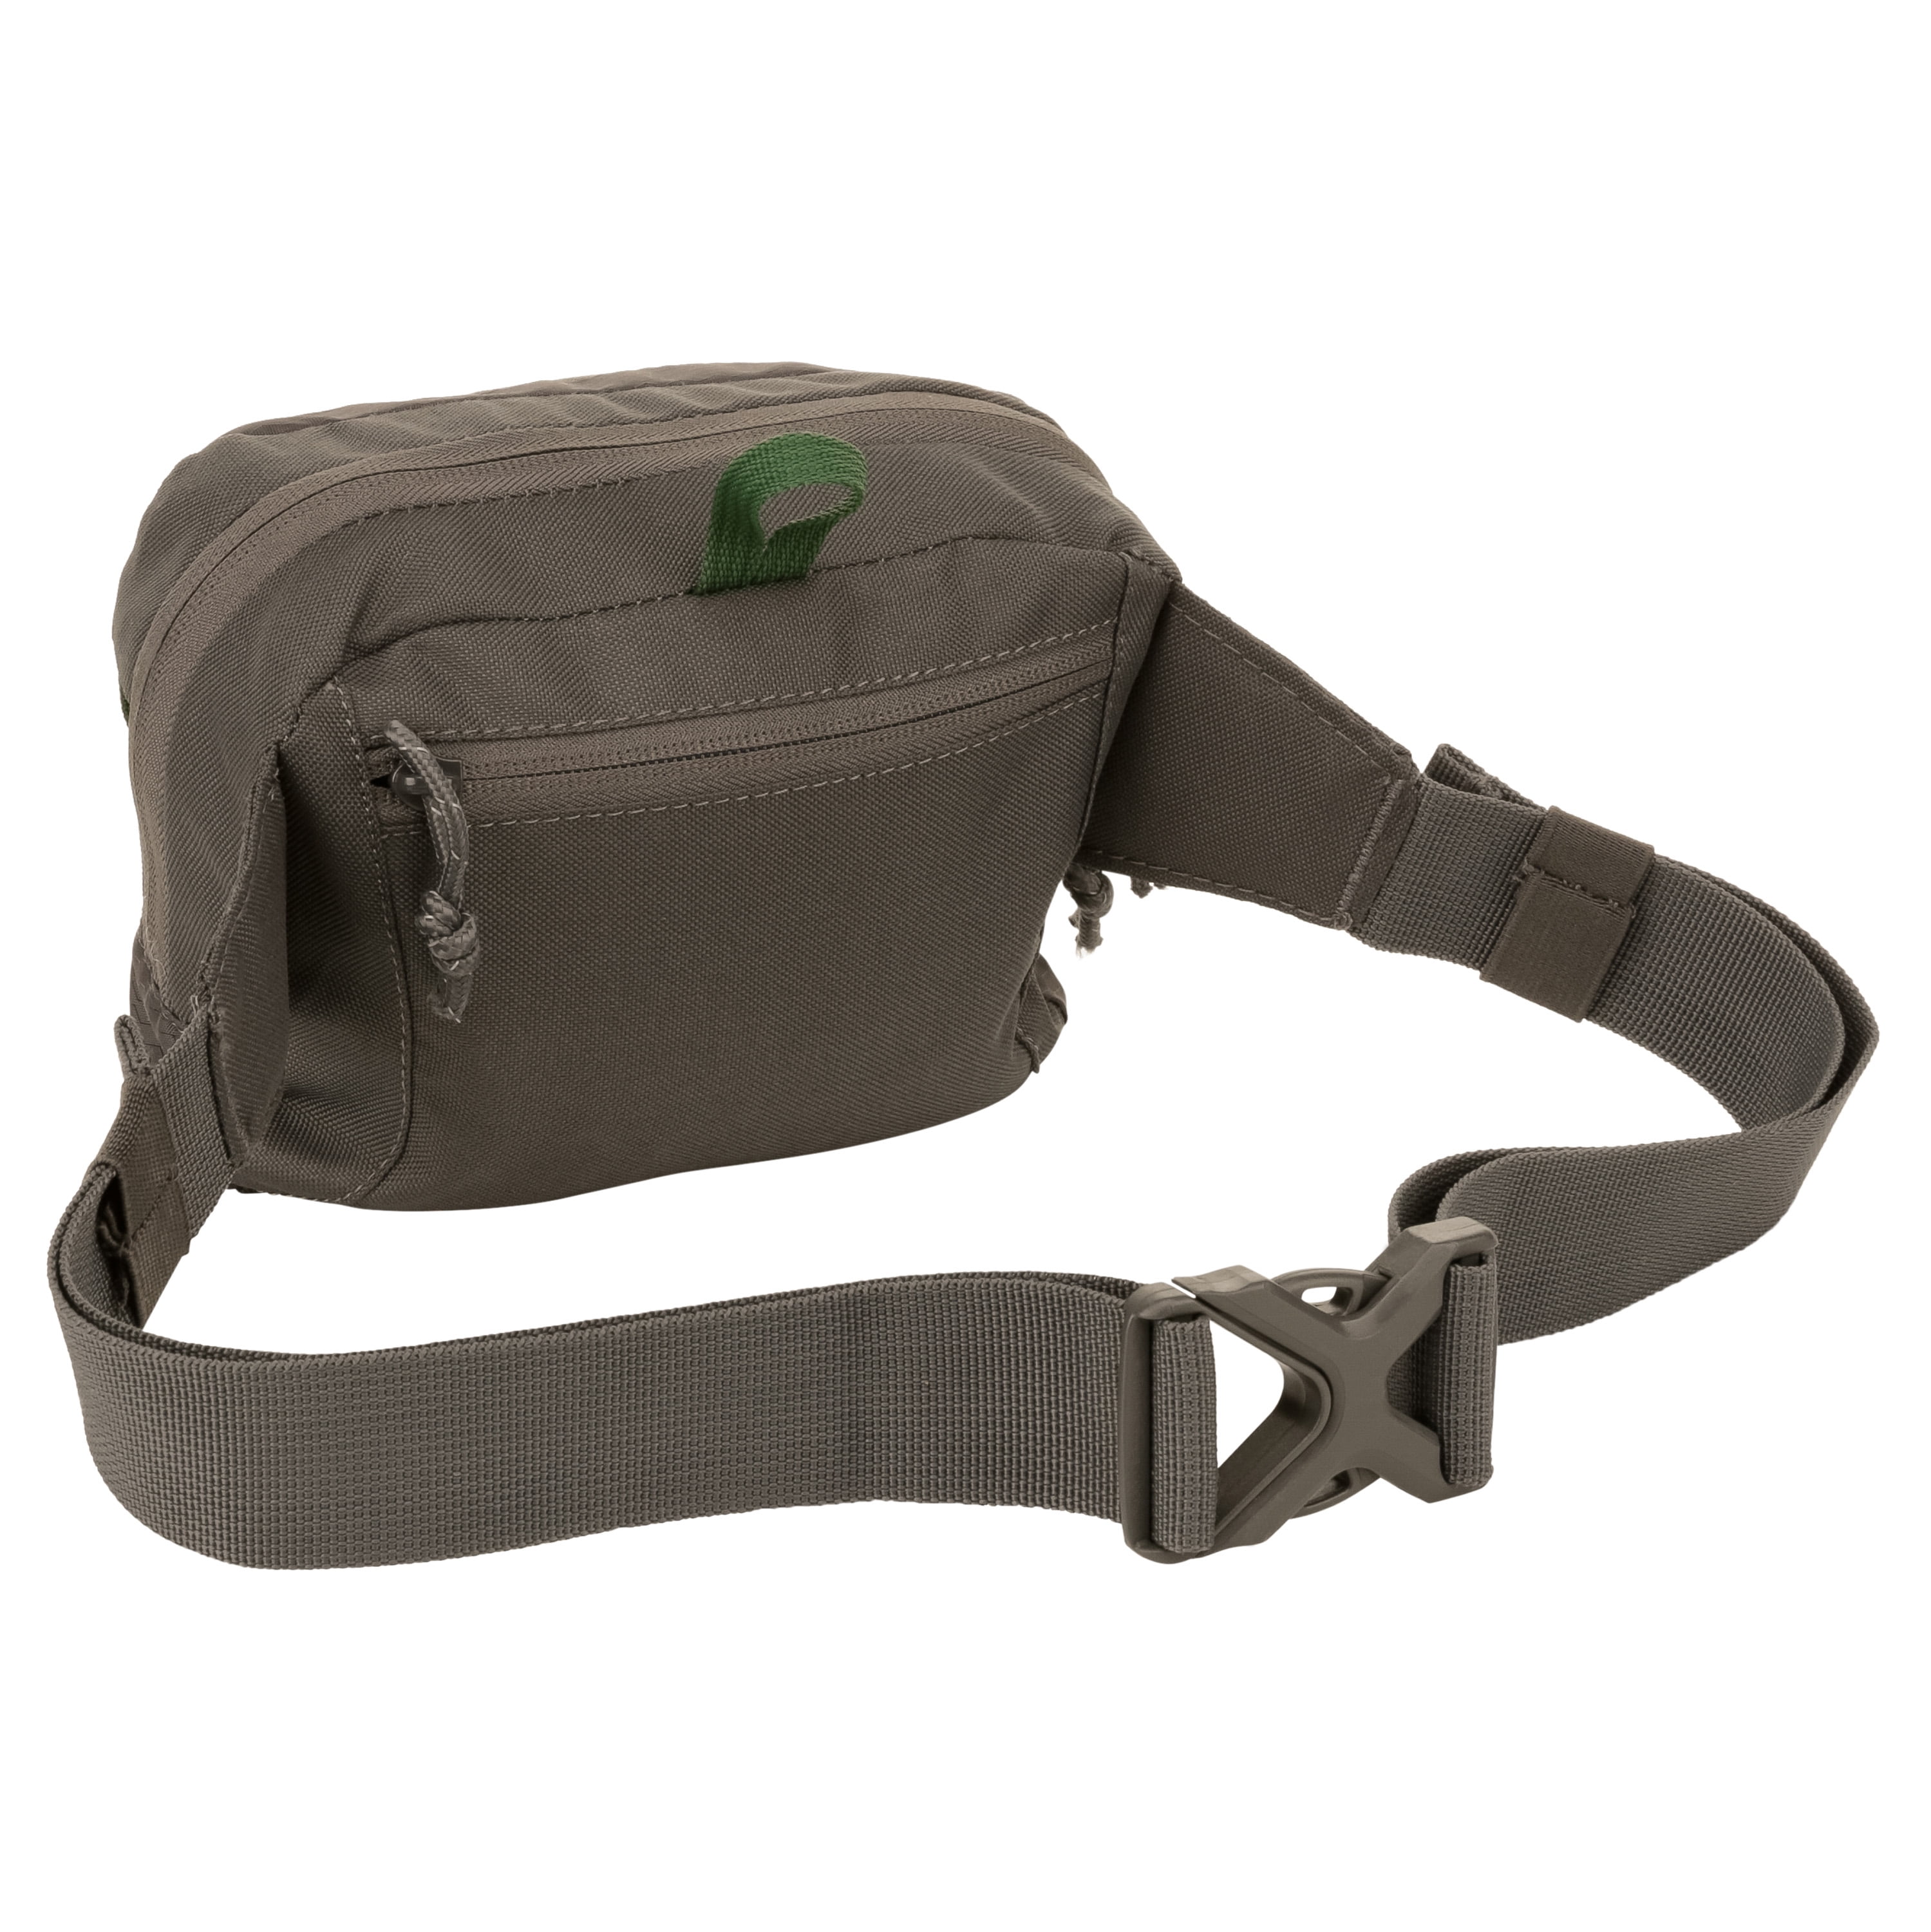 Outdoor Products Fanny Pack Hiking Biking Compact Belt Bag 